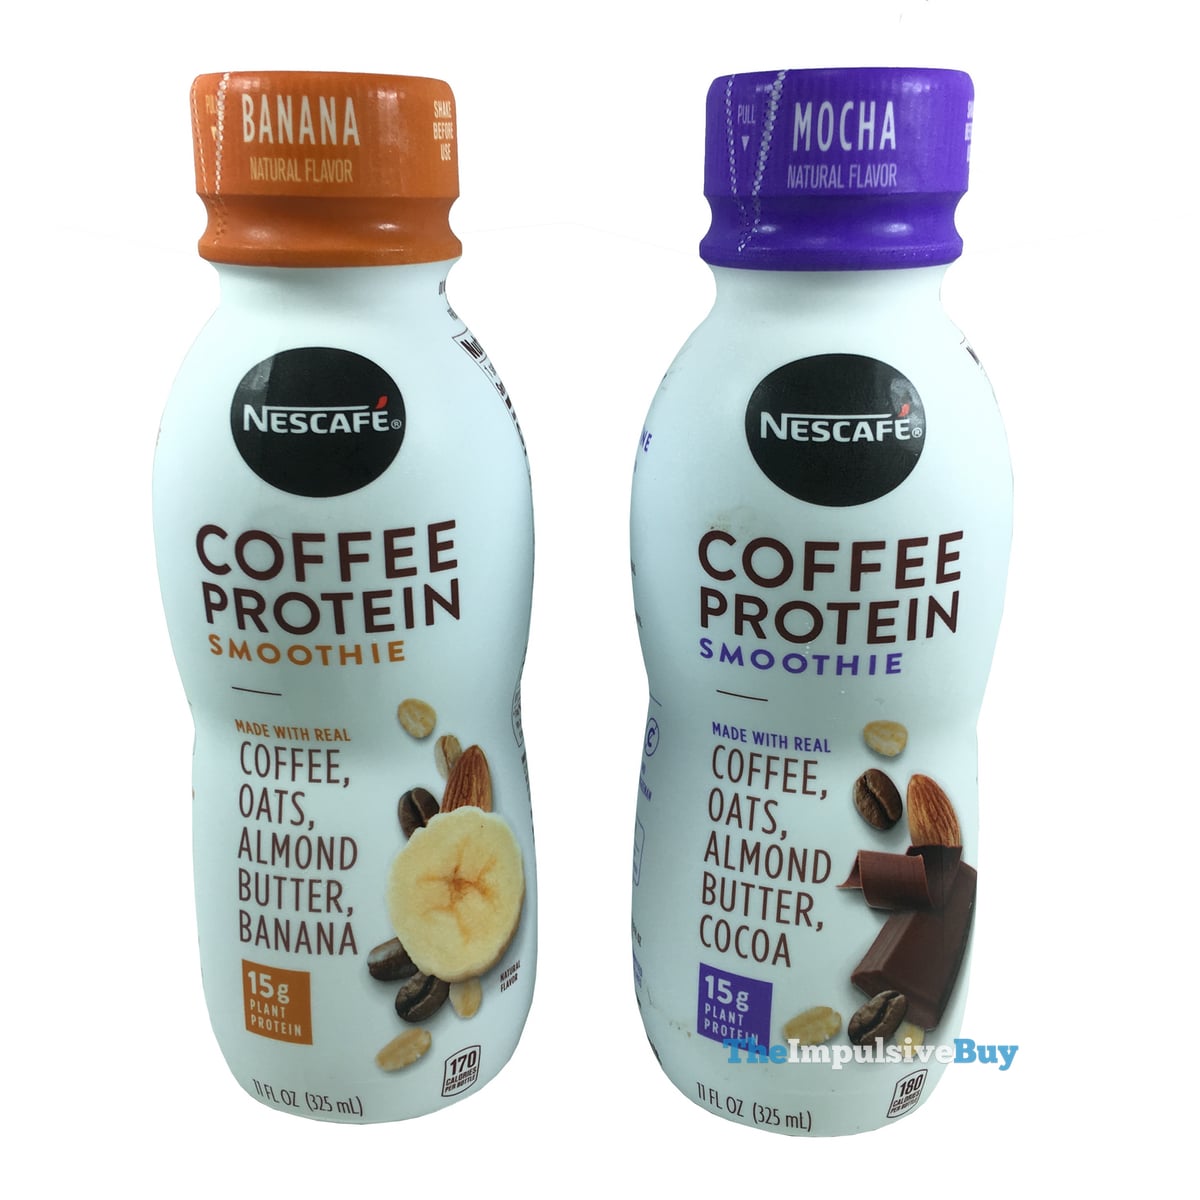 REVIEW: Nescafe Coffee Protein Smoothies - The Impulsive Buy